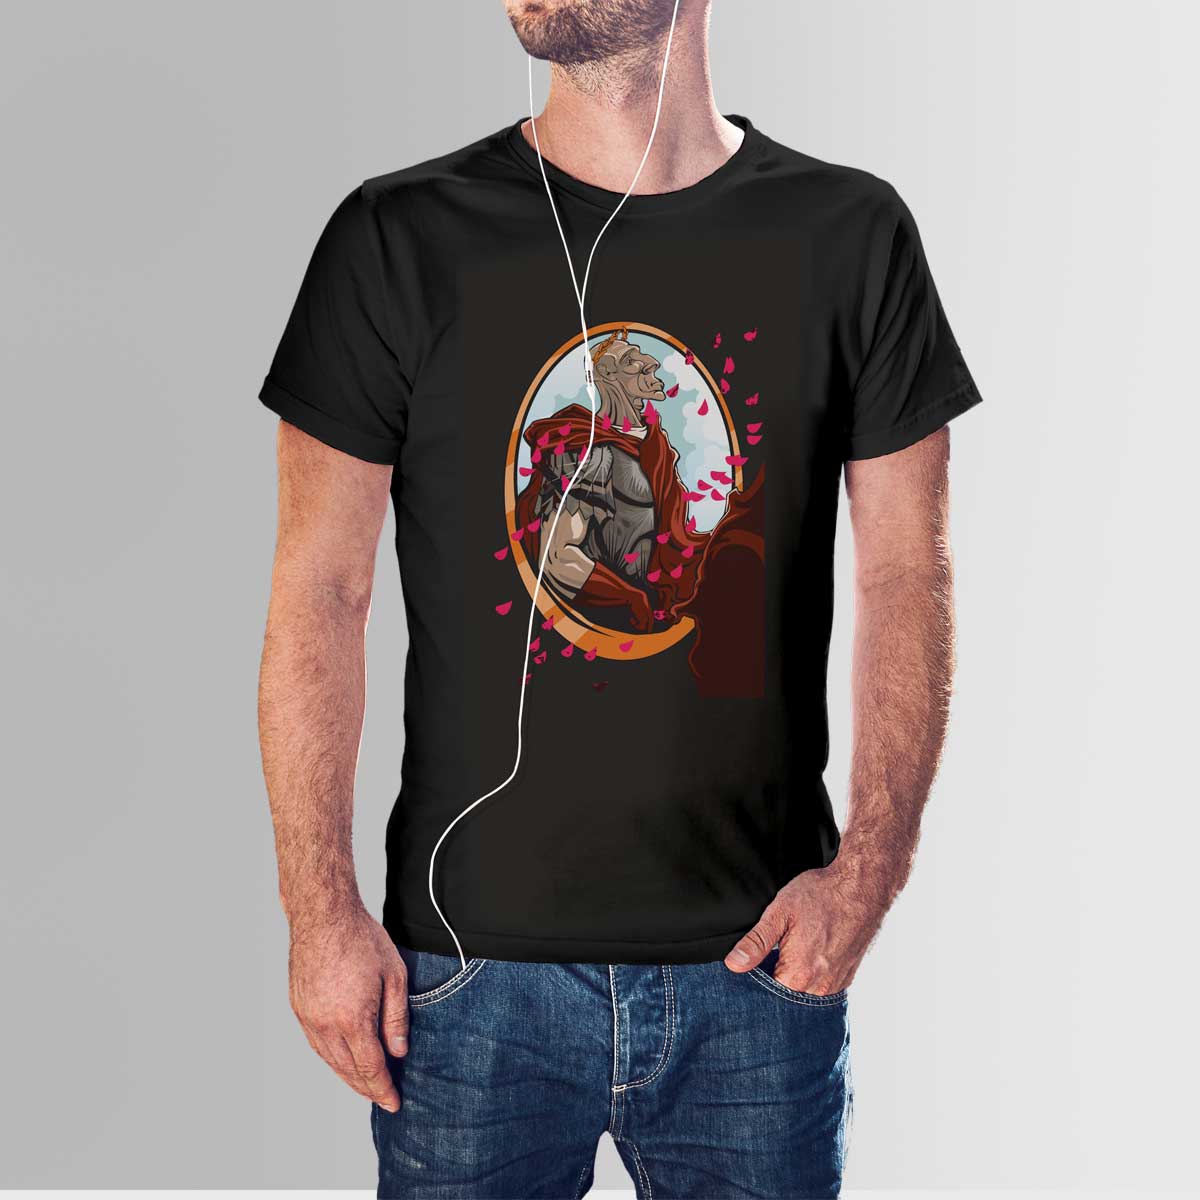 The Gladiator T-Shirt - Design Your Own